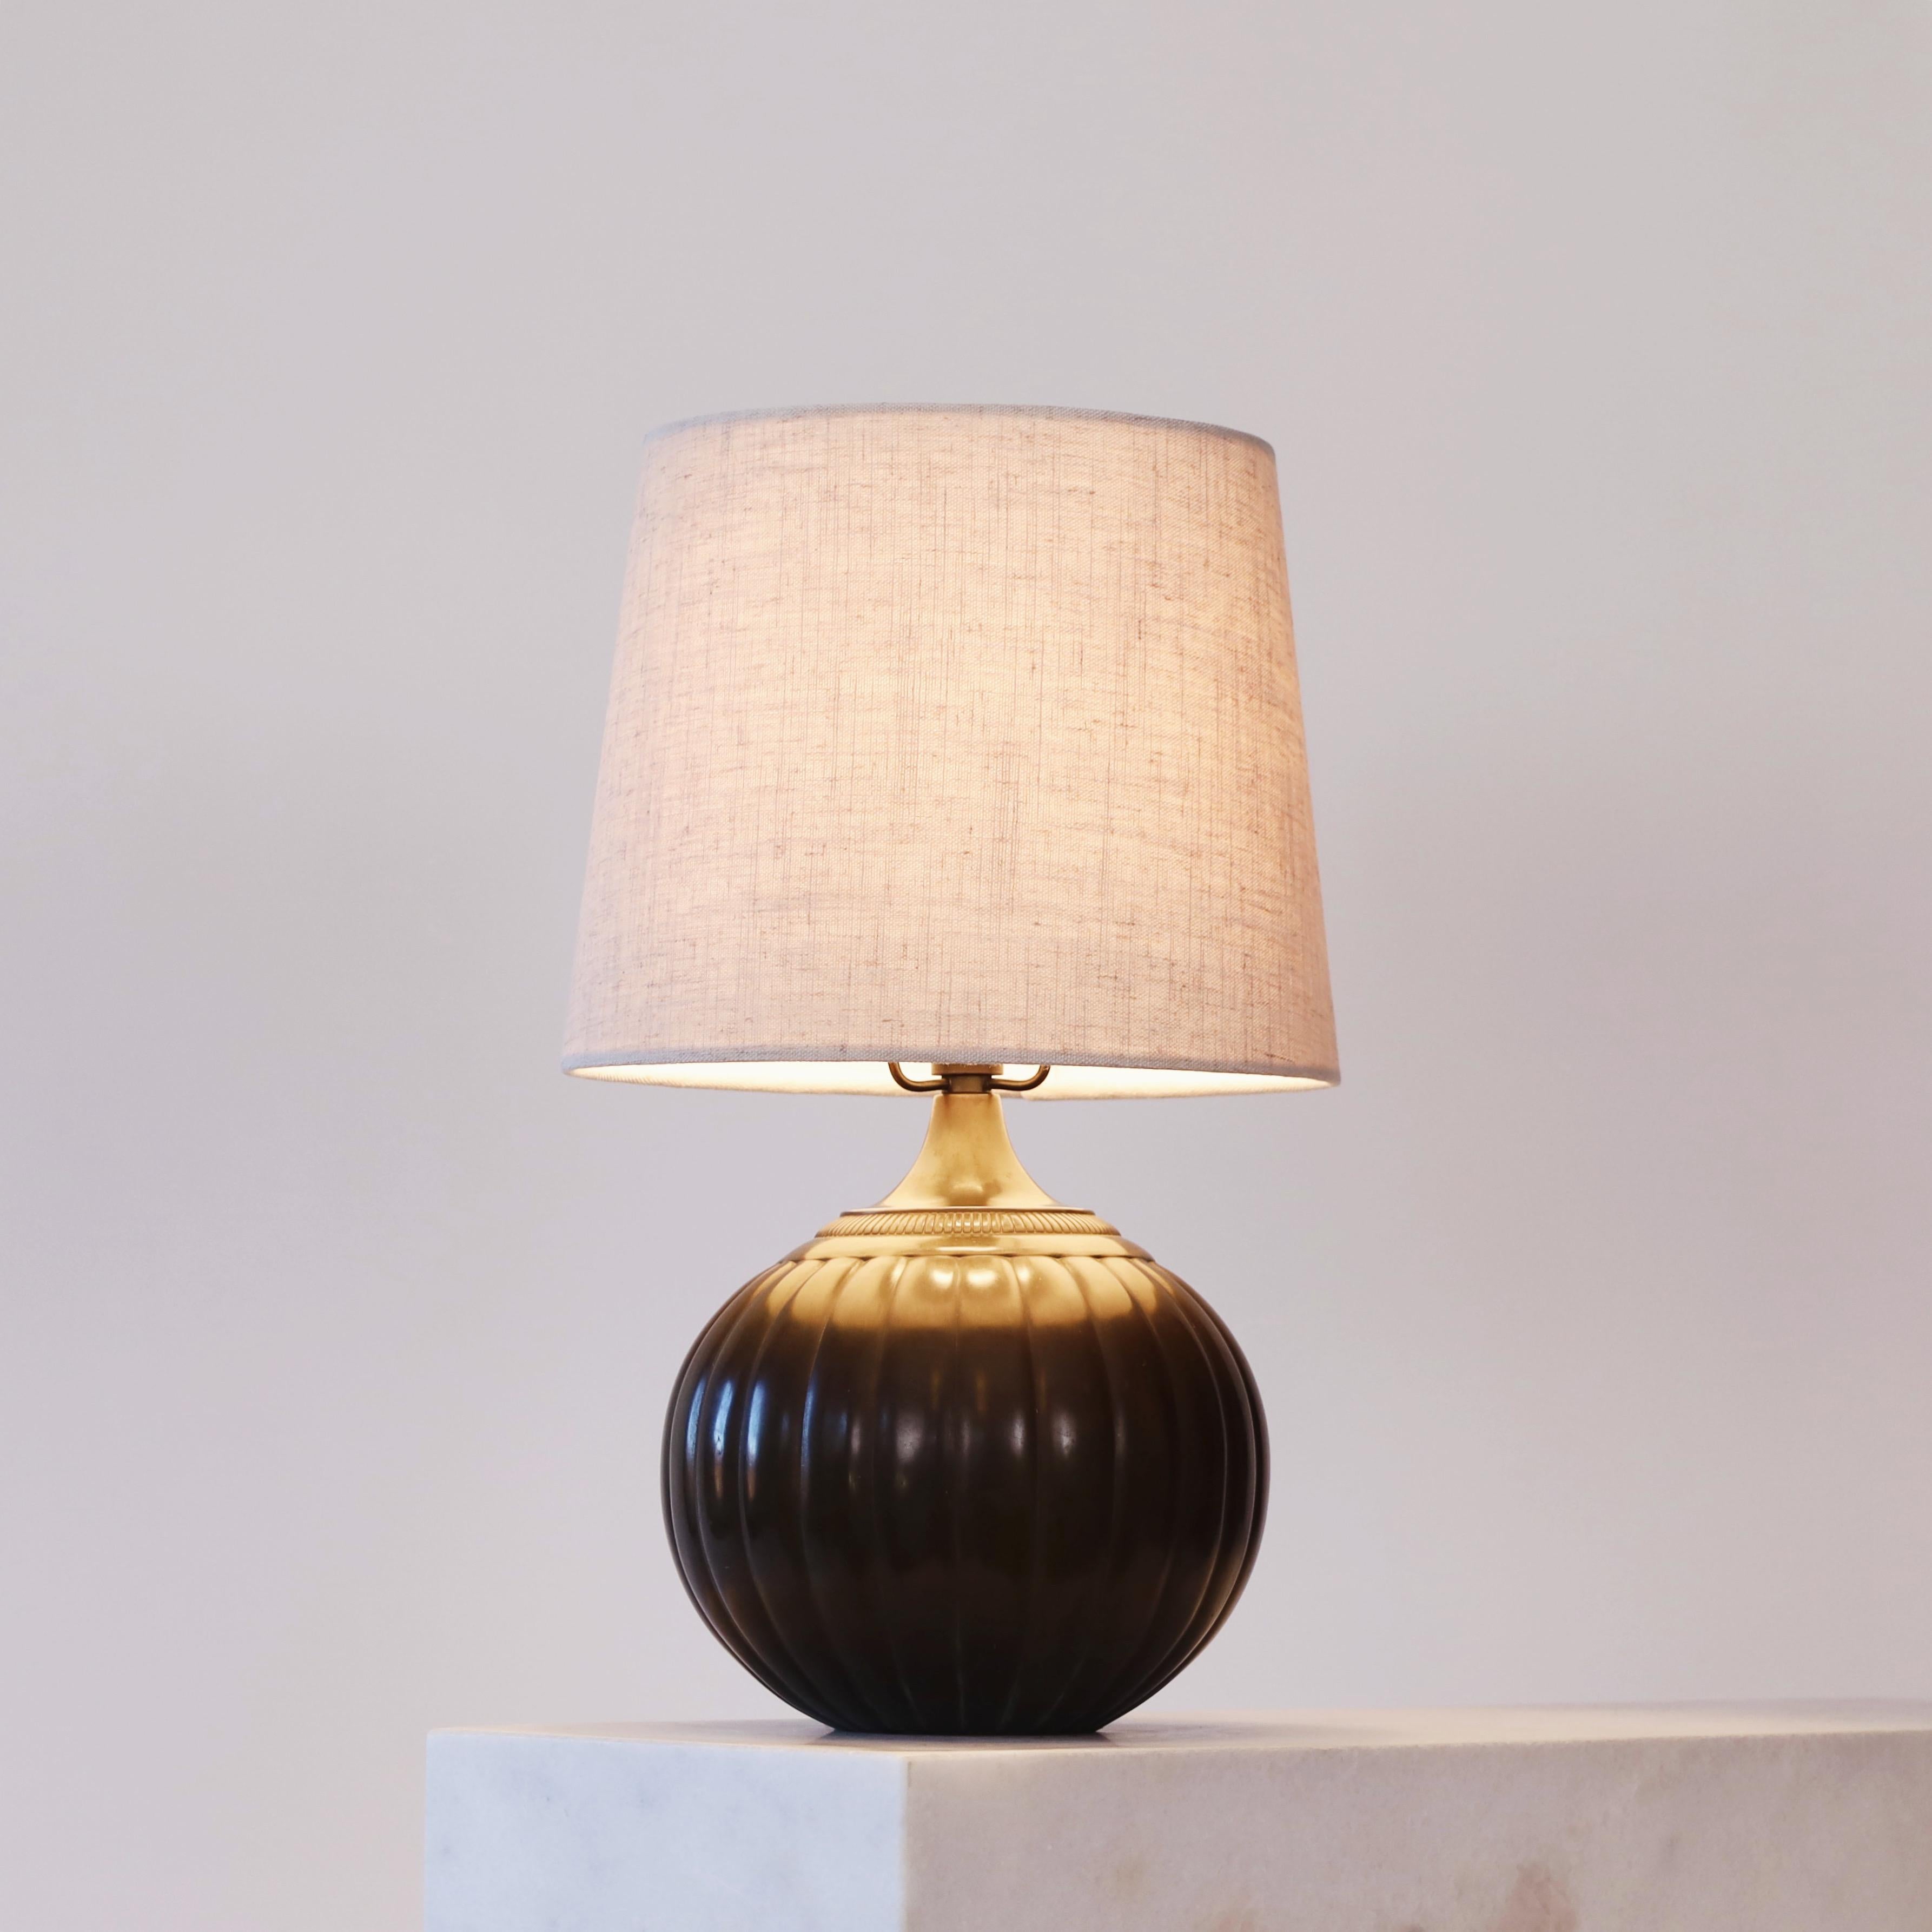 A rare table lamp designed by Just Andersen in 1934. A classic piece of Danish design history for a beautiful home.  

* A round metal lamp with vertical lines and a beige fabric shade
* Designer: Just Andersen
* Model: 1632 (stamped ‘Just 1632’)
*